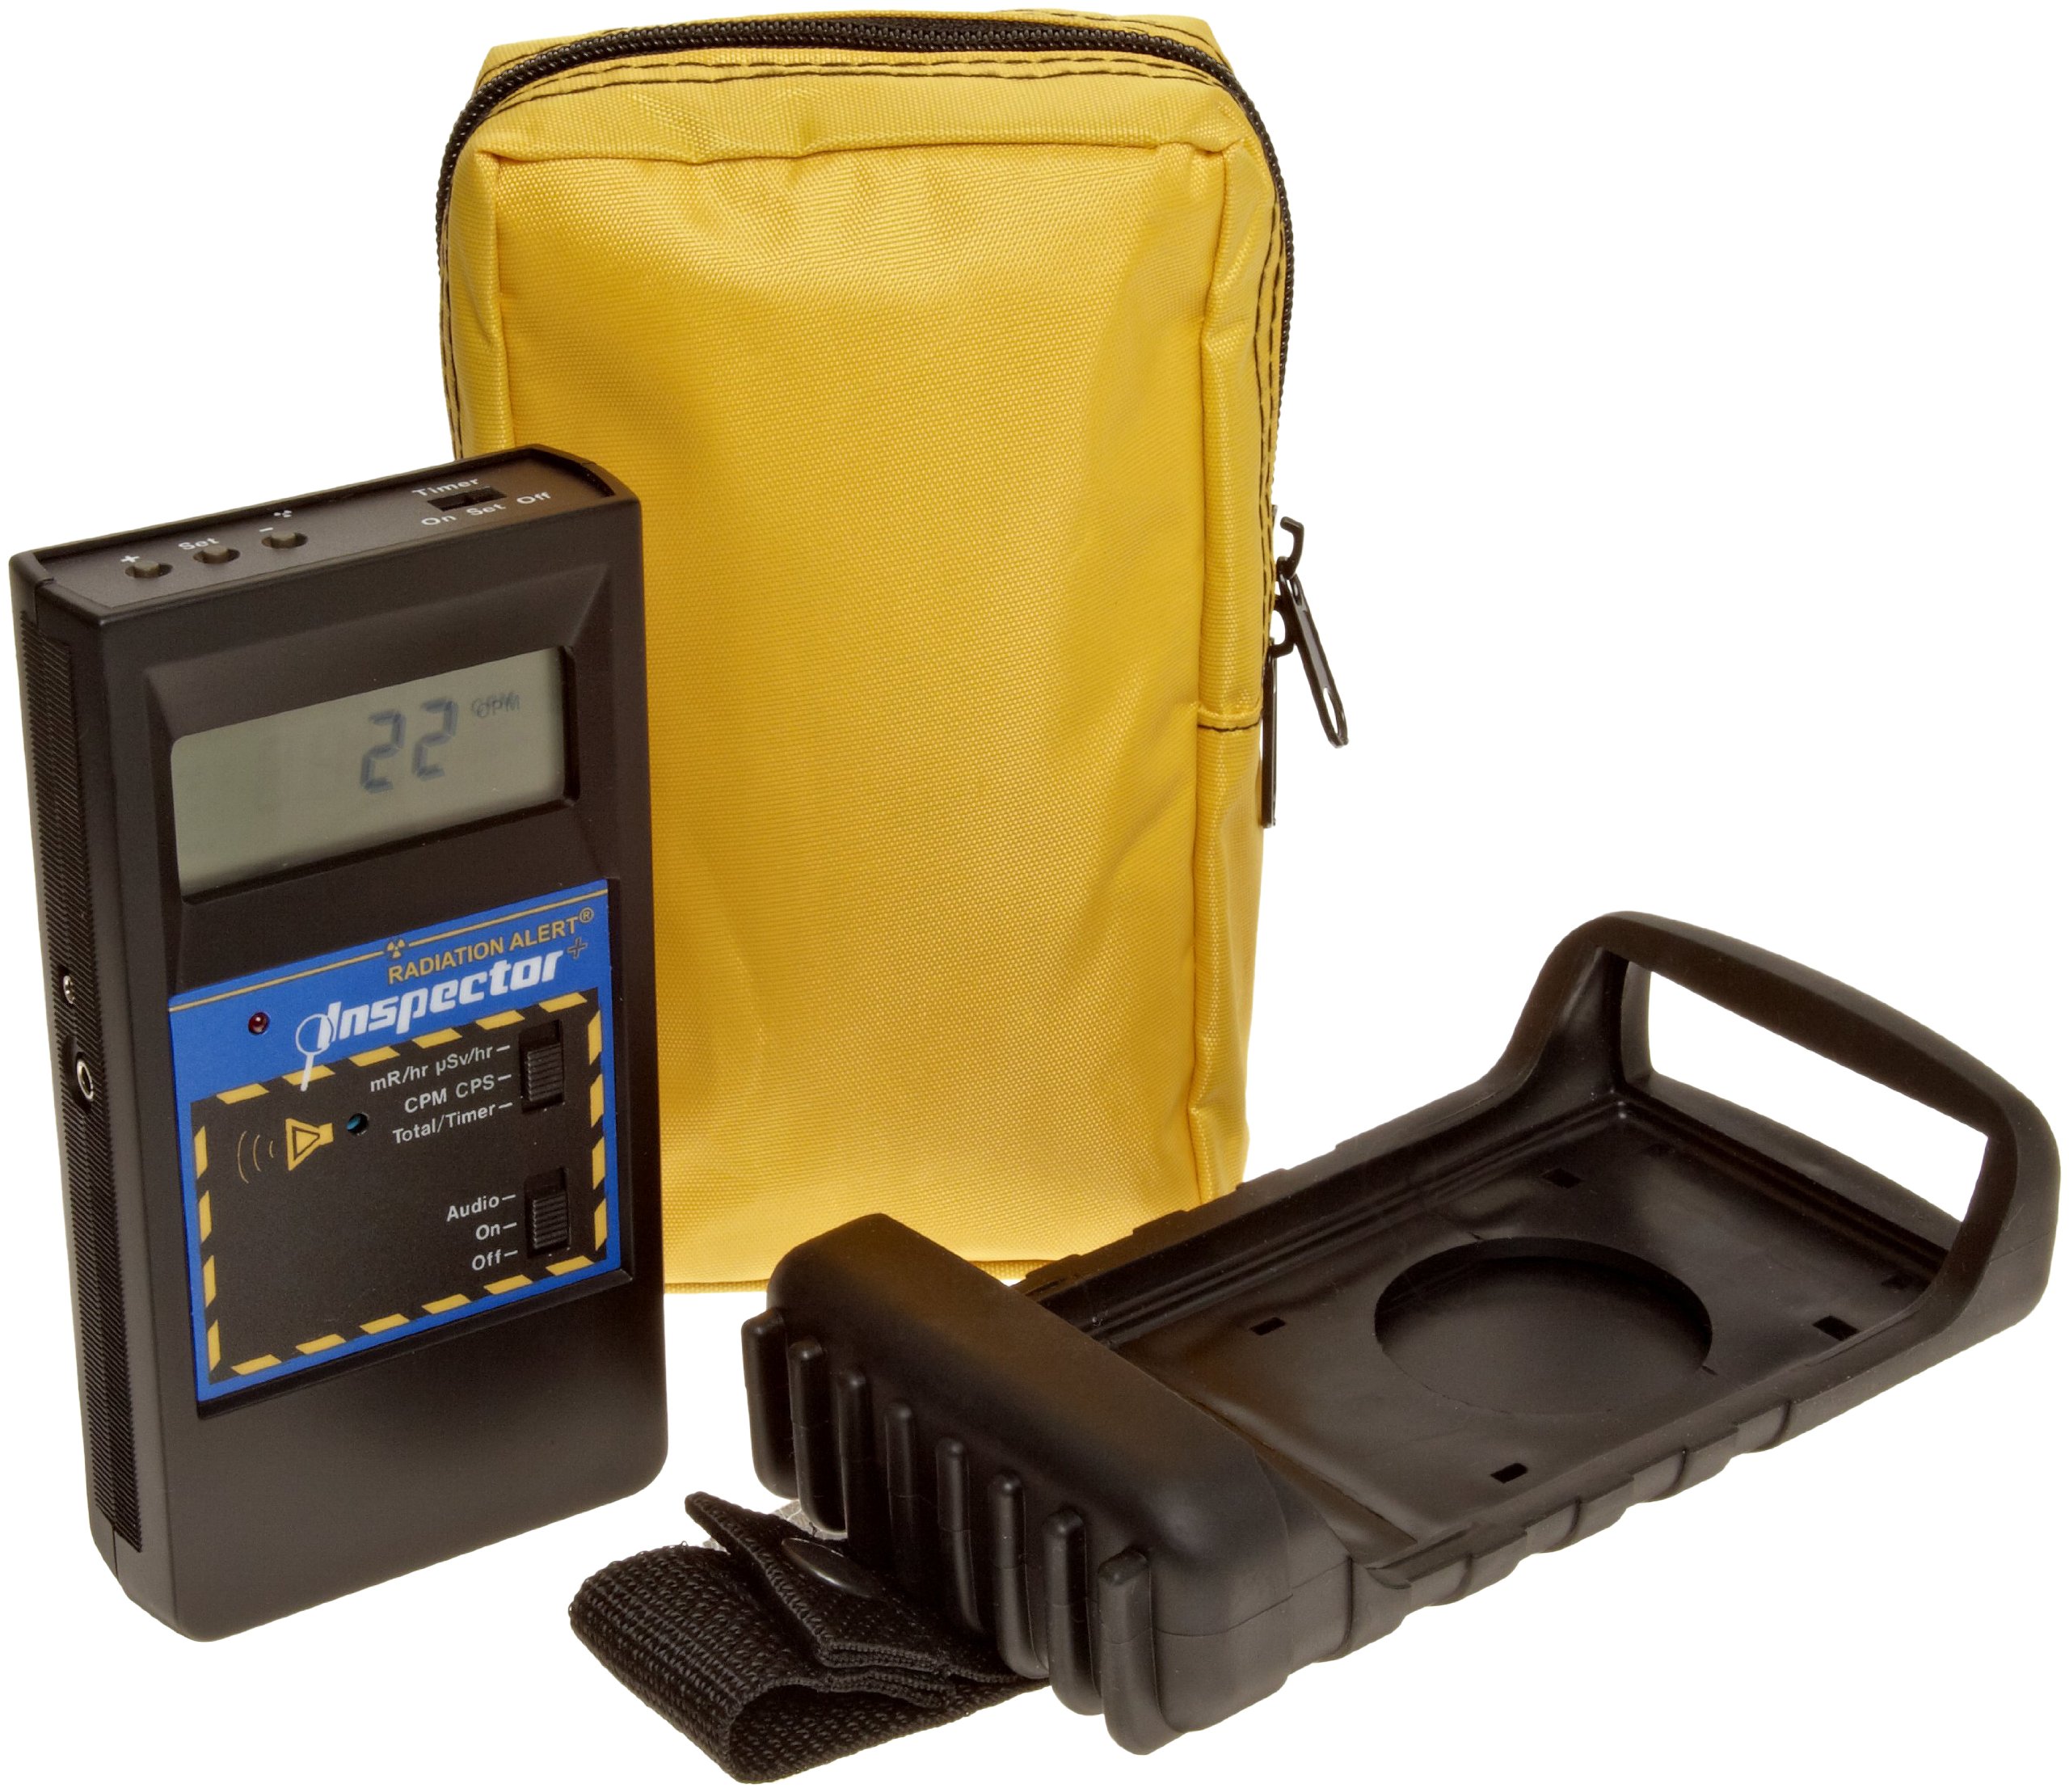 Ghost hunting gear, radiation meter with case